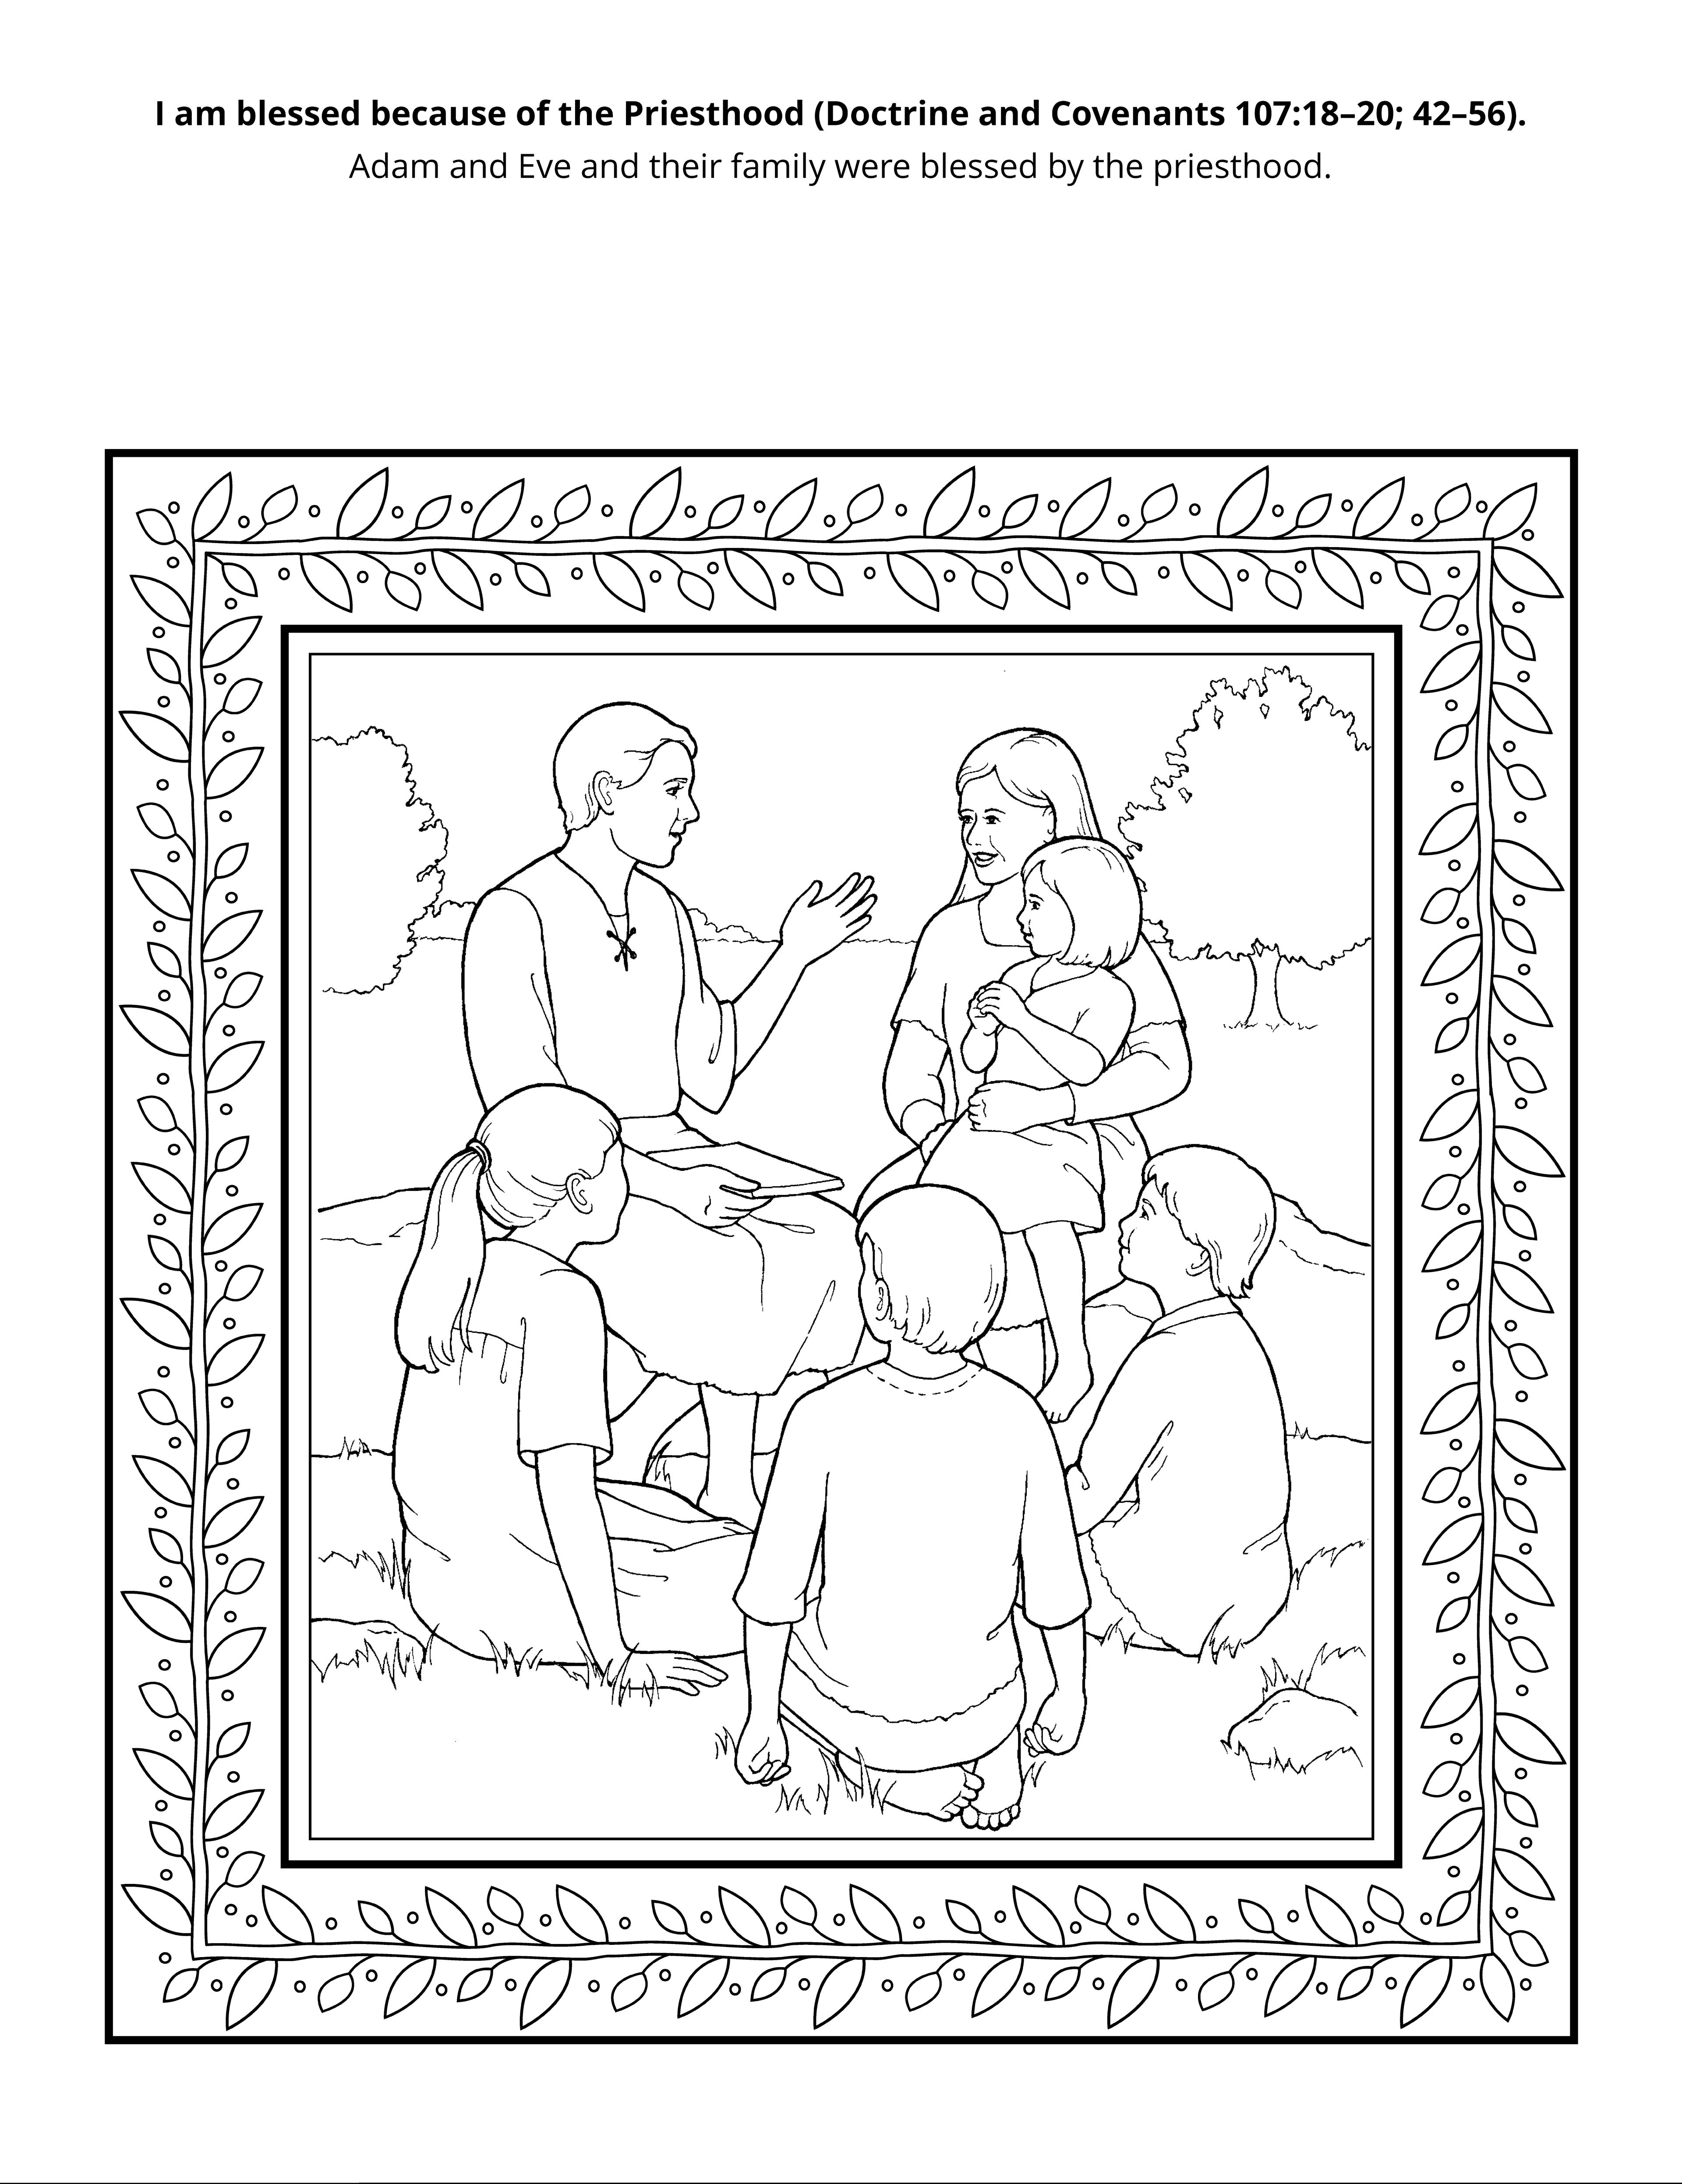 Line drawing depicts Adam and Eve and children. © undefined ipCode 1.